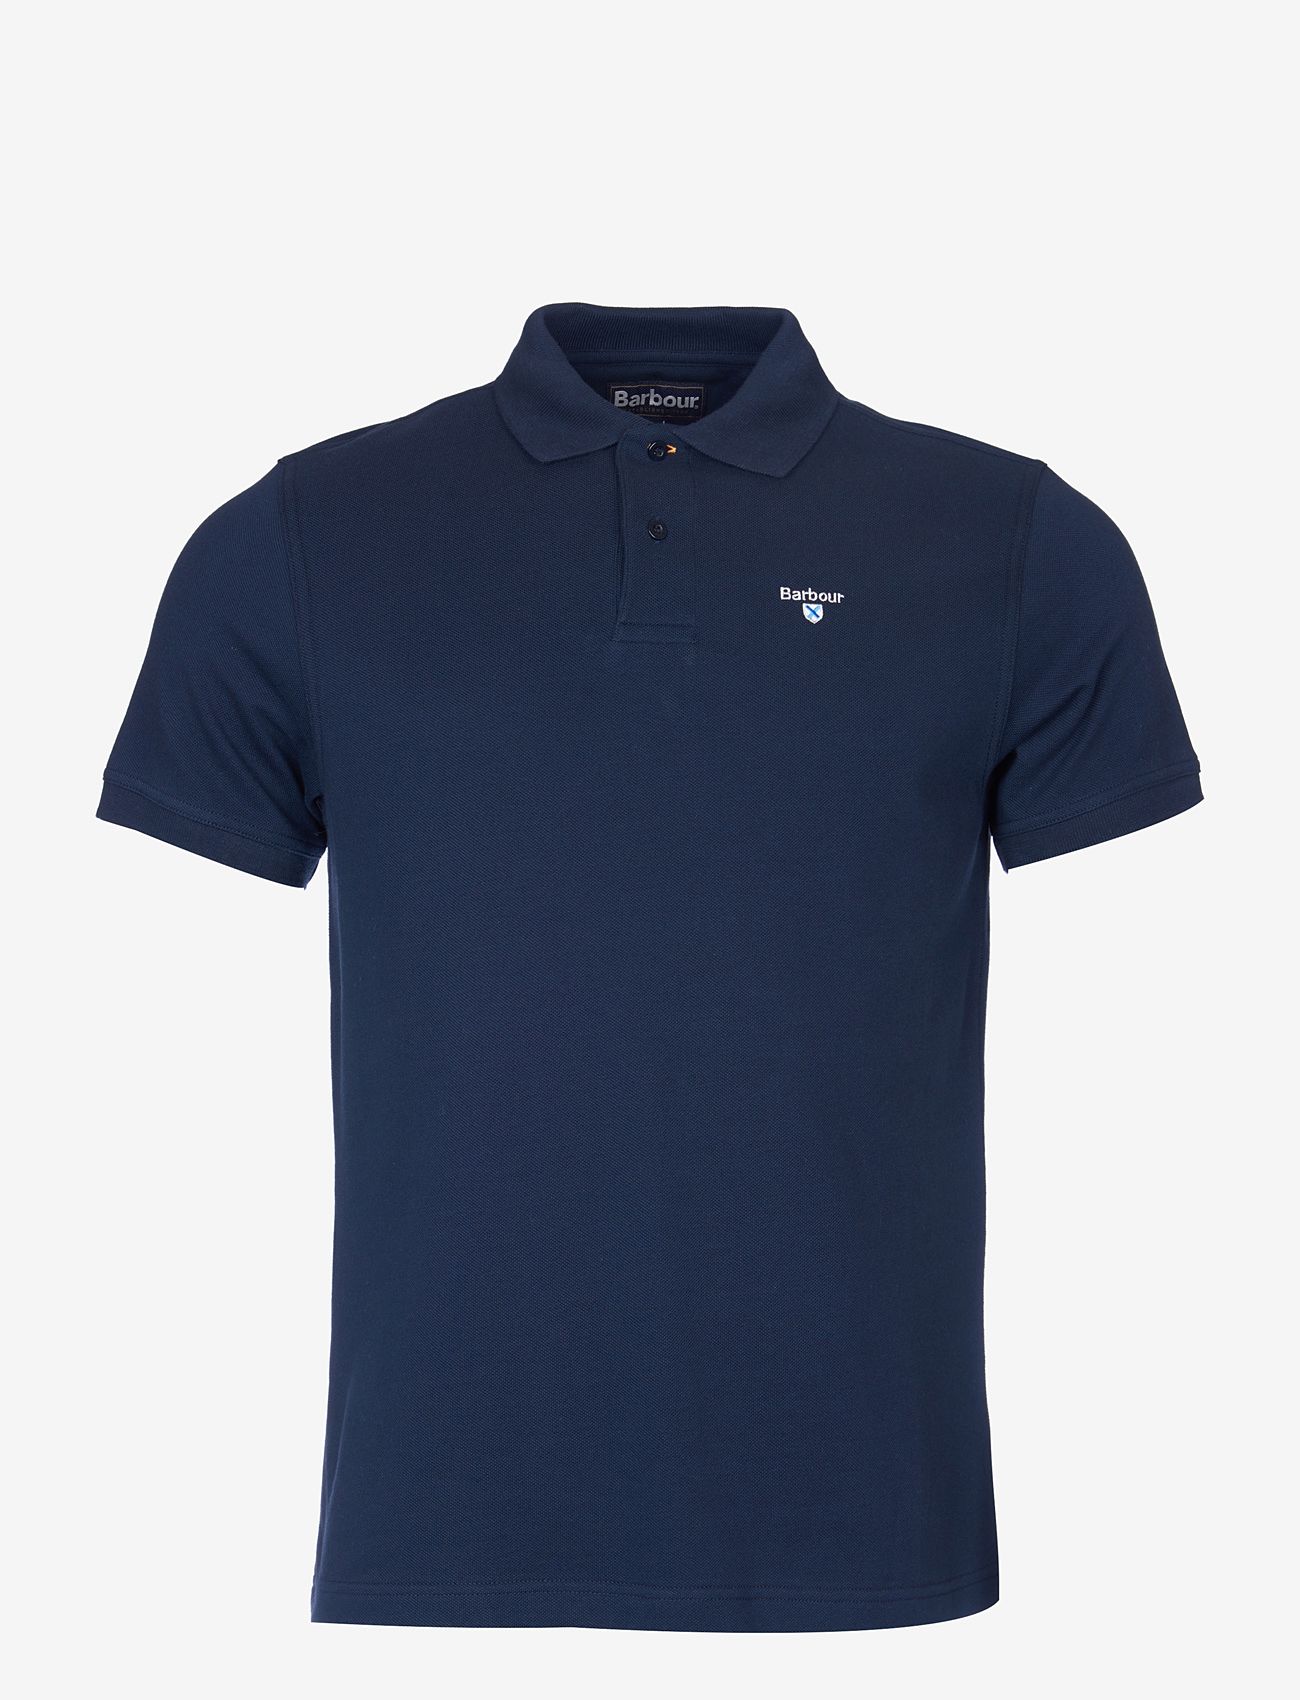 Barbour - Barbour Sports Polo JASMINE - basic shirts - new navy - 1